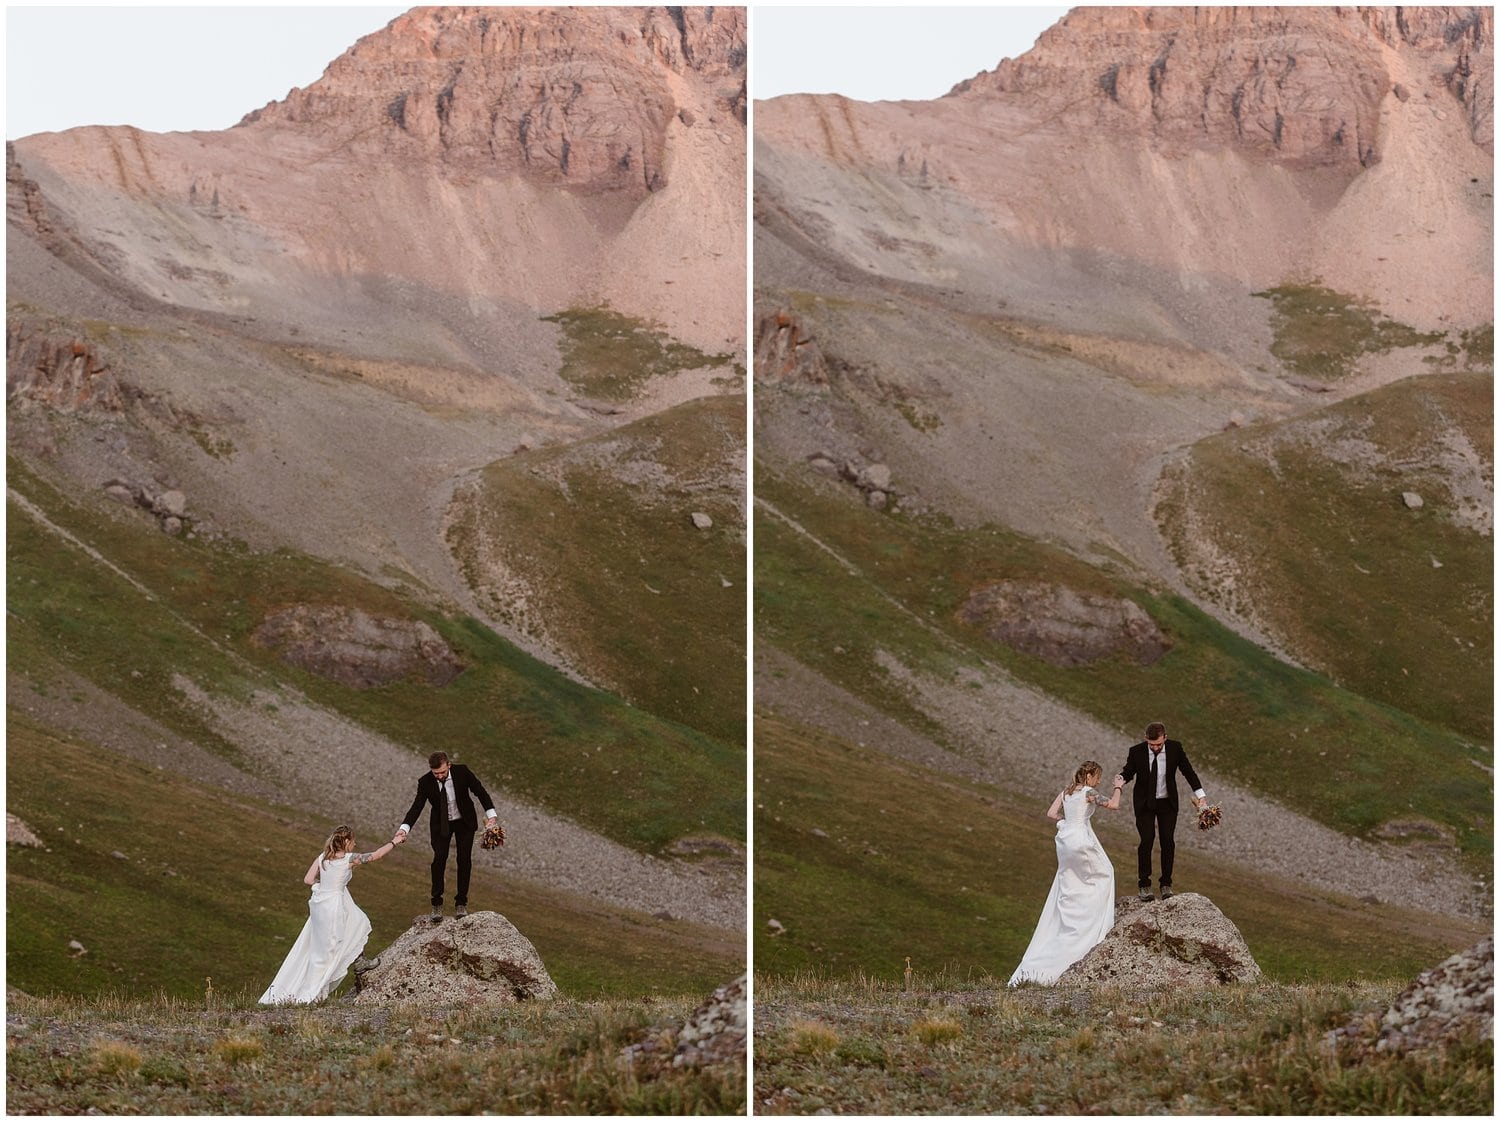 Bride and groom climb up rock together, with mountain in the background, in Ouray, Colorado. 